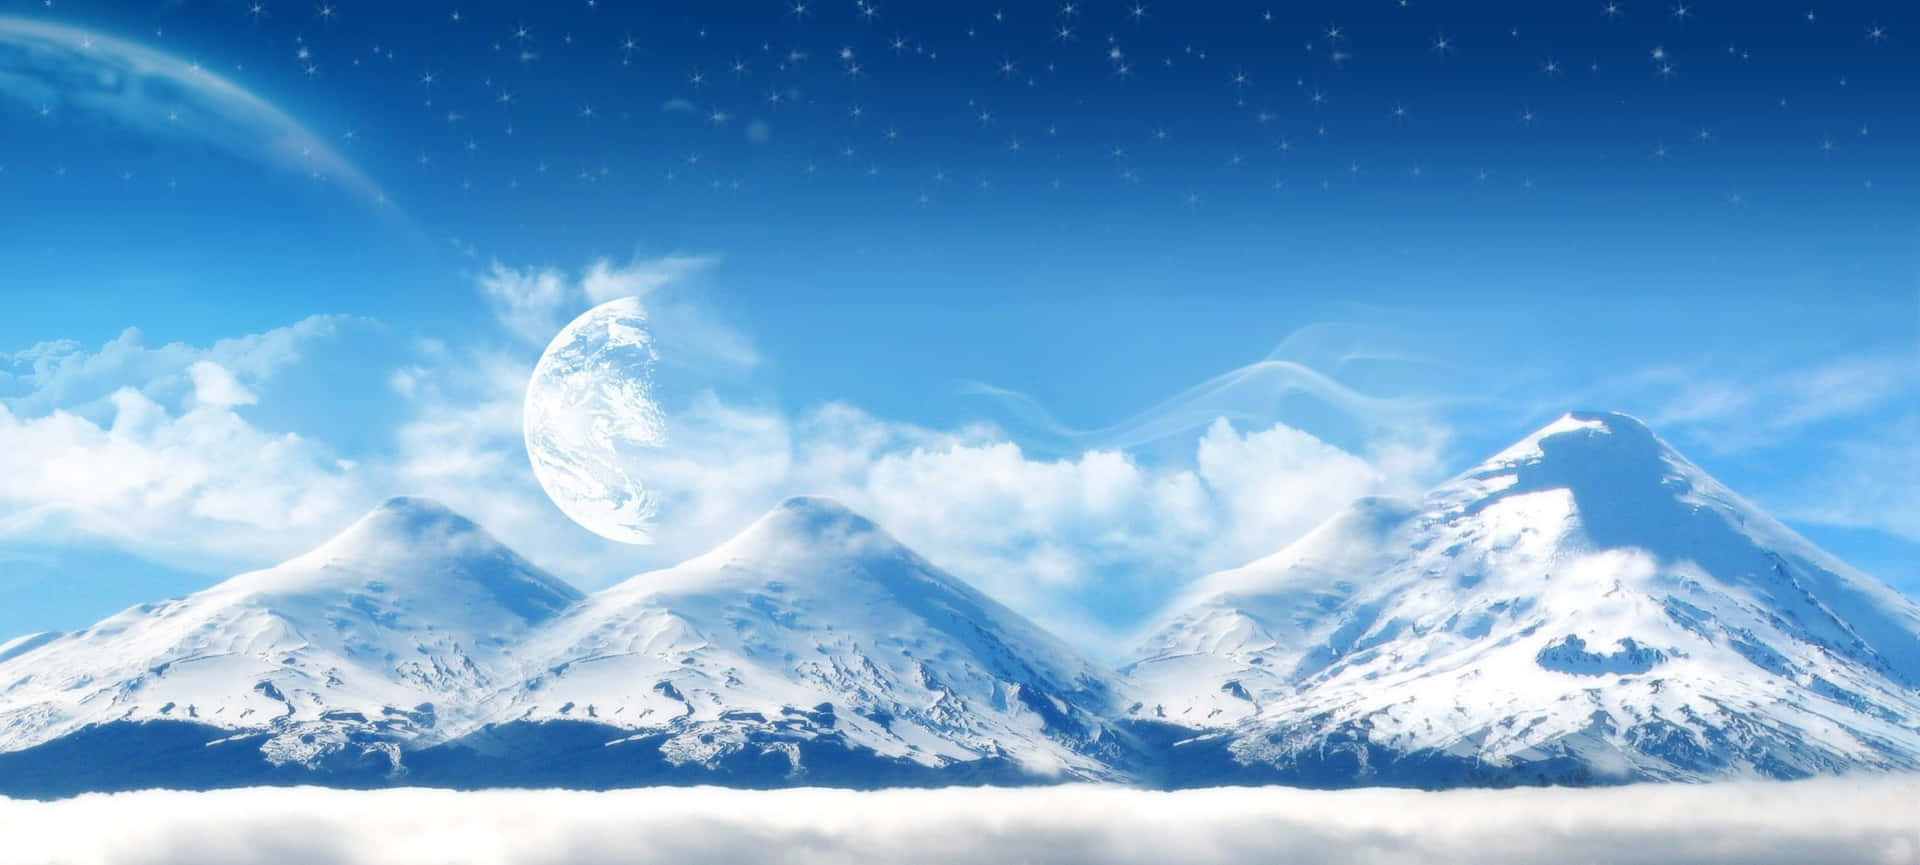 Cool Monitor Snowy Mountains Wallpaper